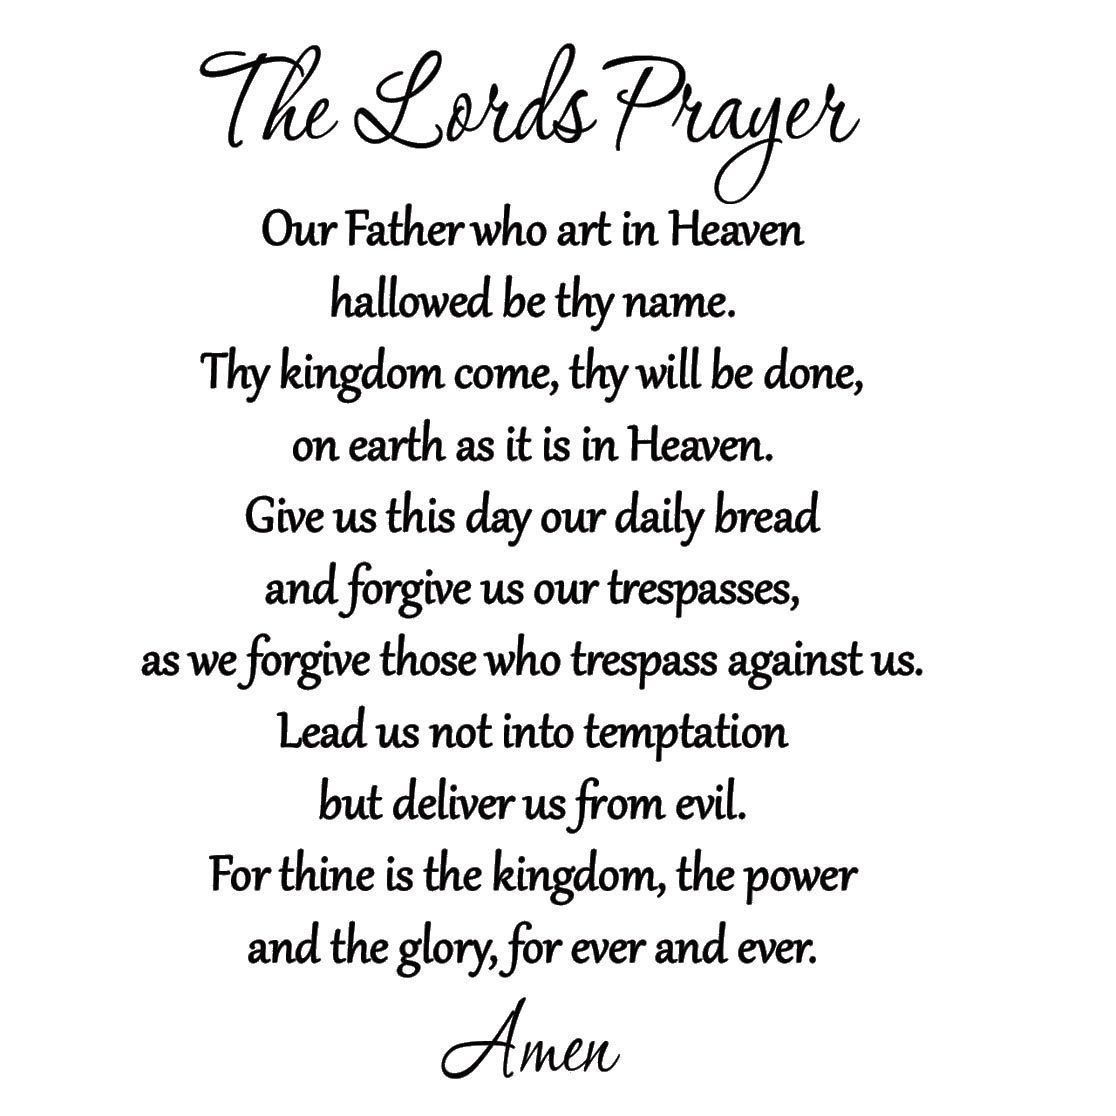 VWAQ The Lord's Prayer Bible Wall Decal Our Father Vinyl Wall Art Scripture Quote Faith Home Christian Decor Stickers - image 2 of 2